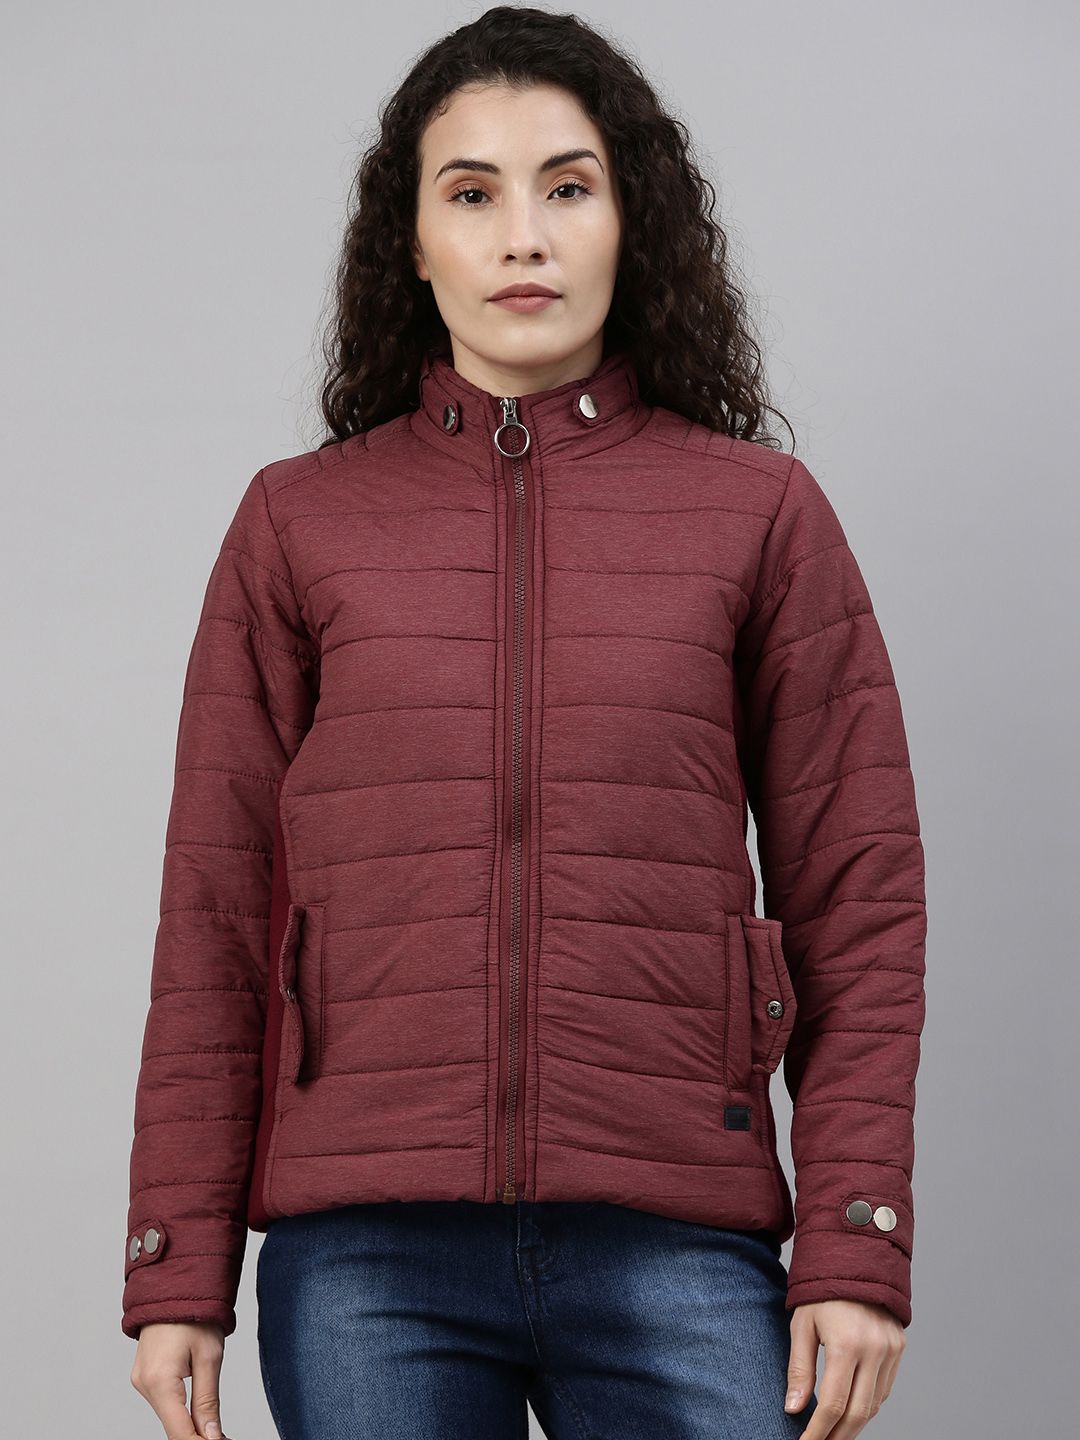 Campus Sutra Women Maroon Solid Puffer Jacket Price in India